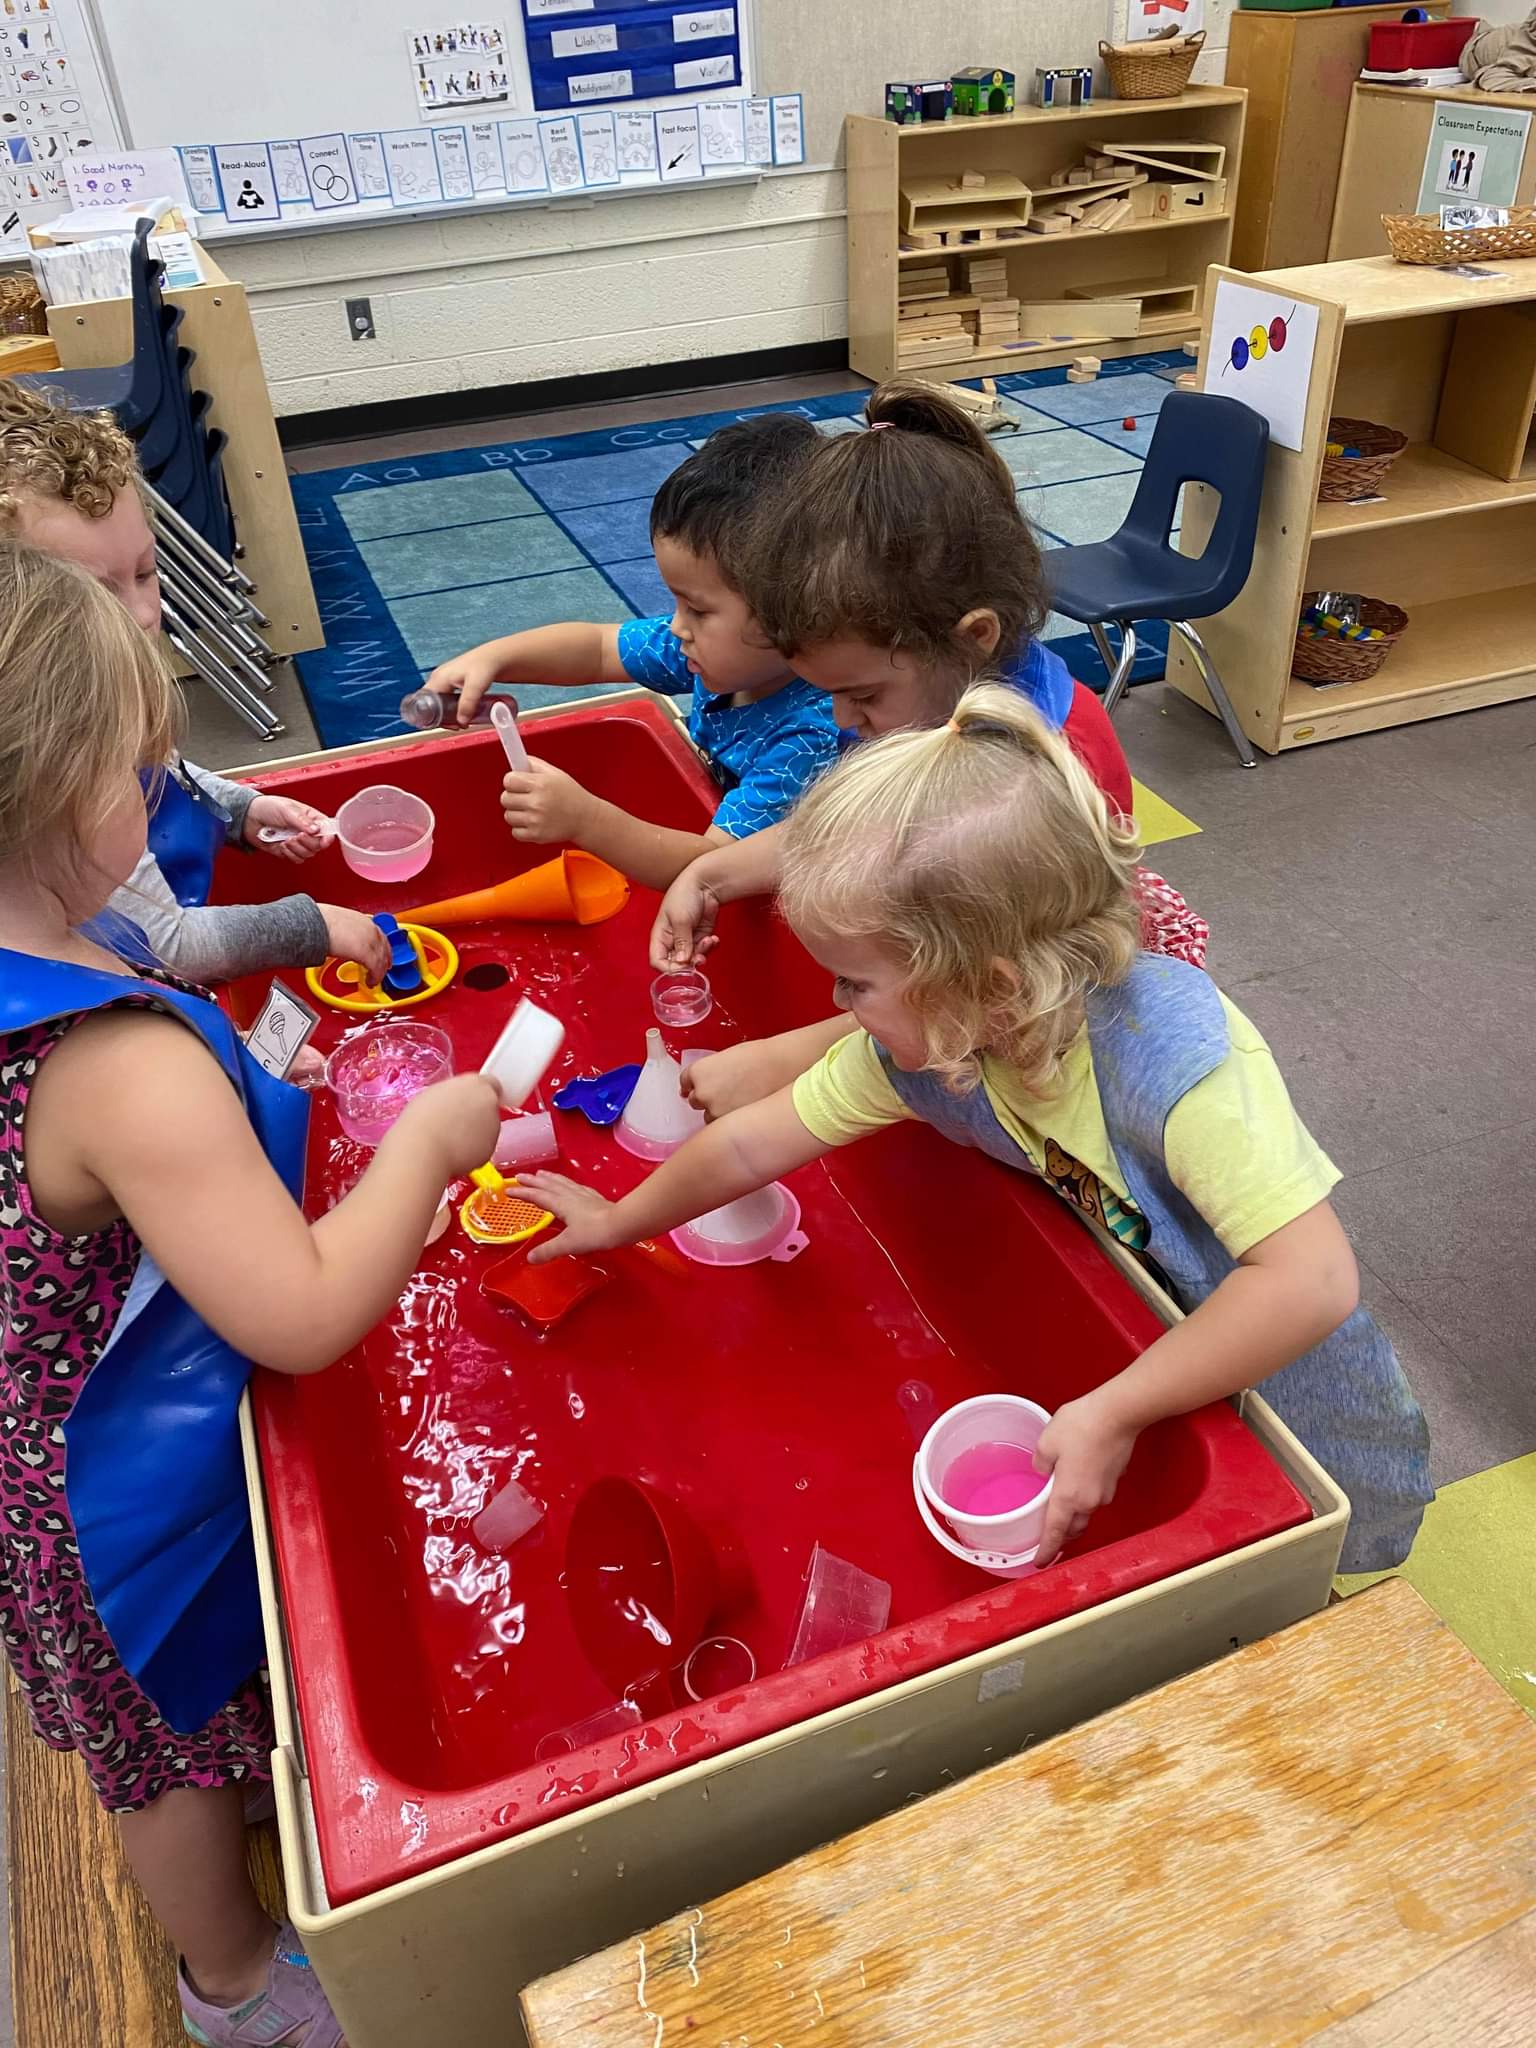 Exploration and teamwork at the water table